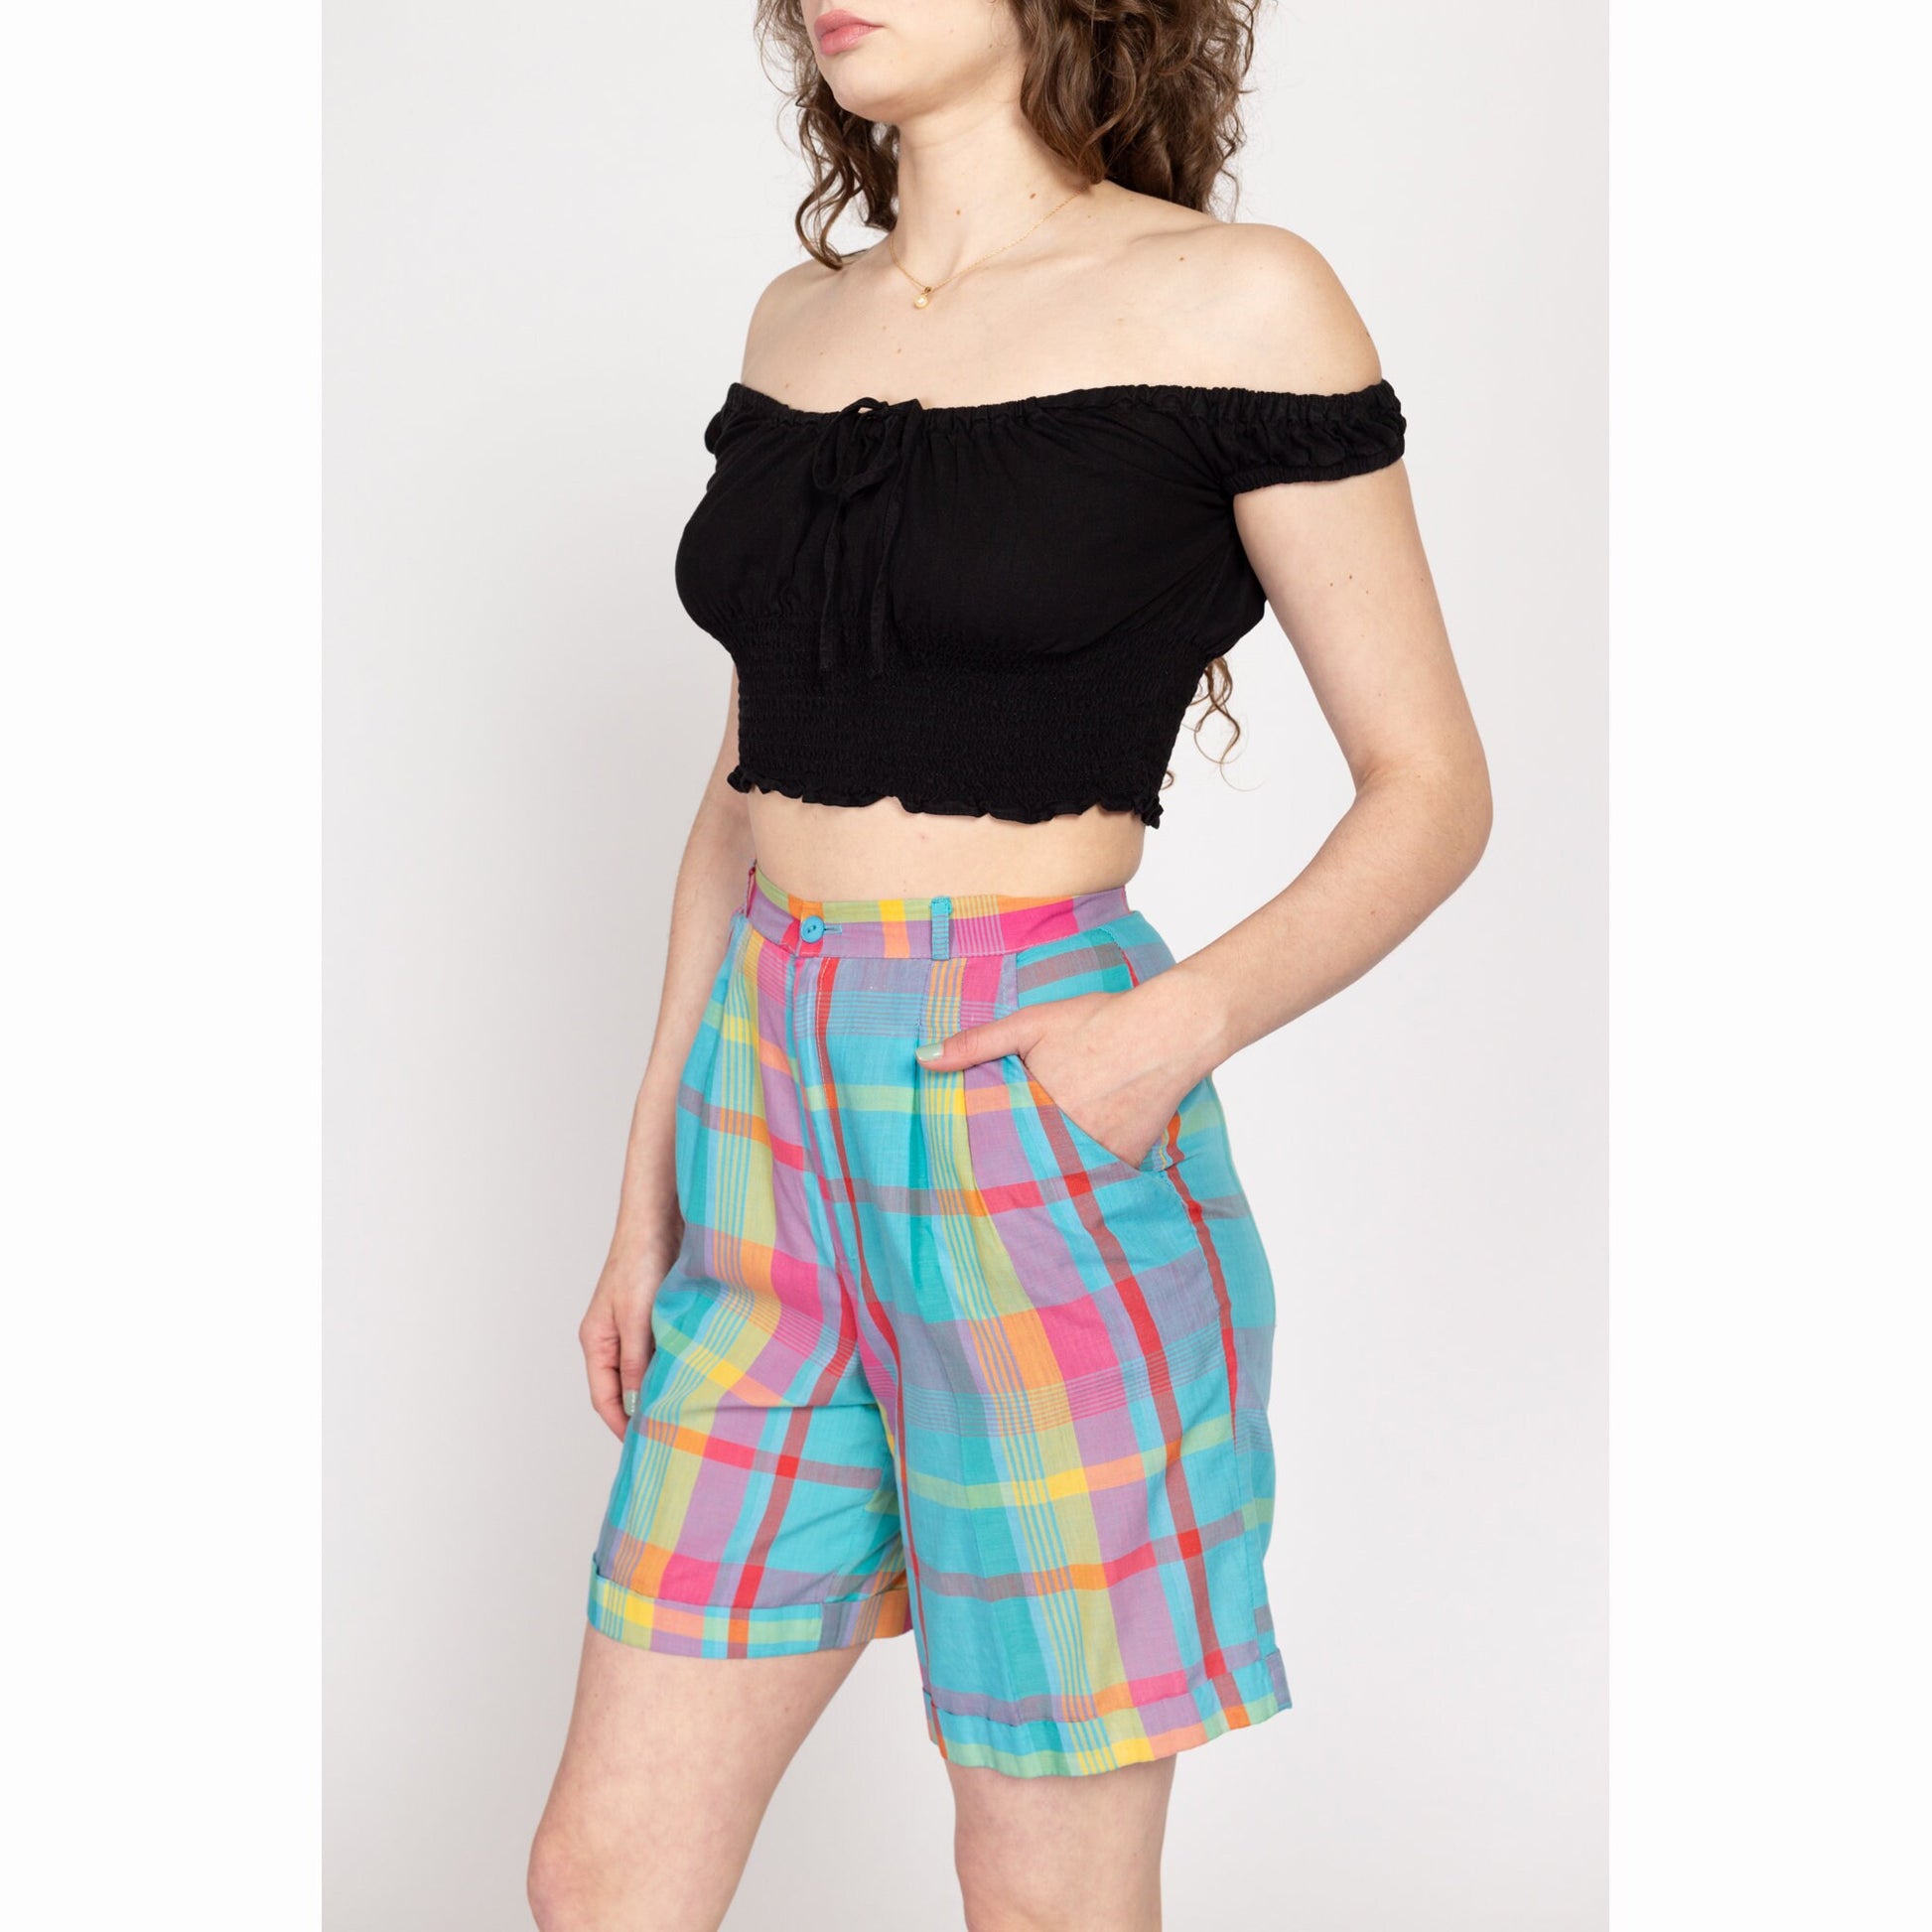 Small 80s Madras Plaid High Waisted Shorts 25.5" | Vintage High Waisted Casual Pleated Shorts